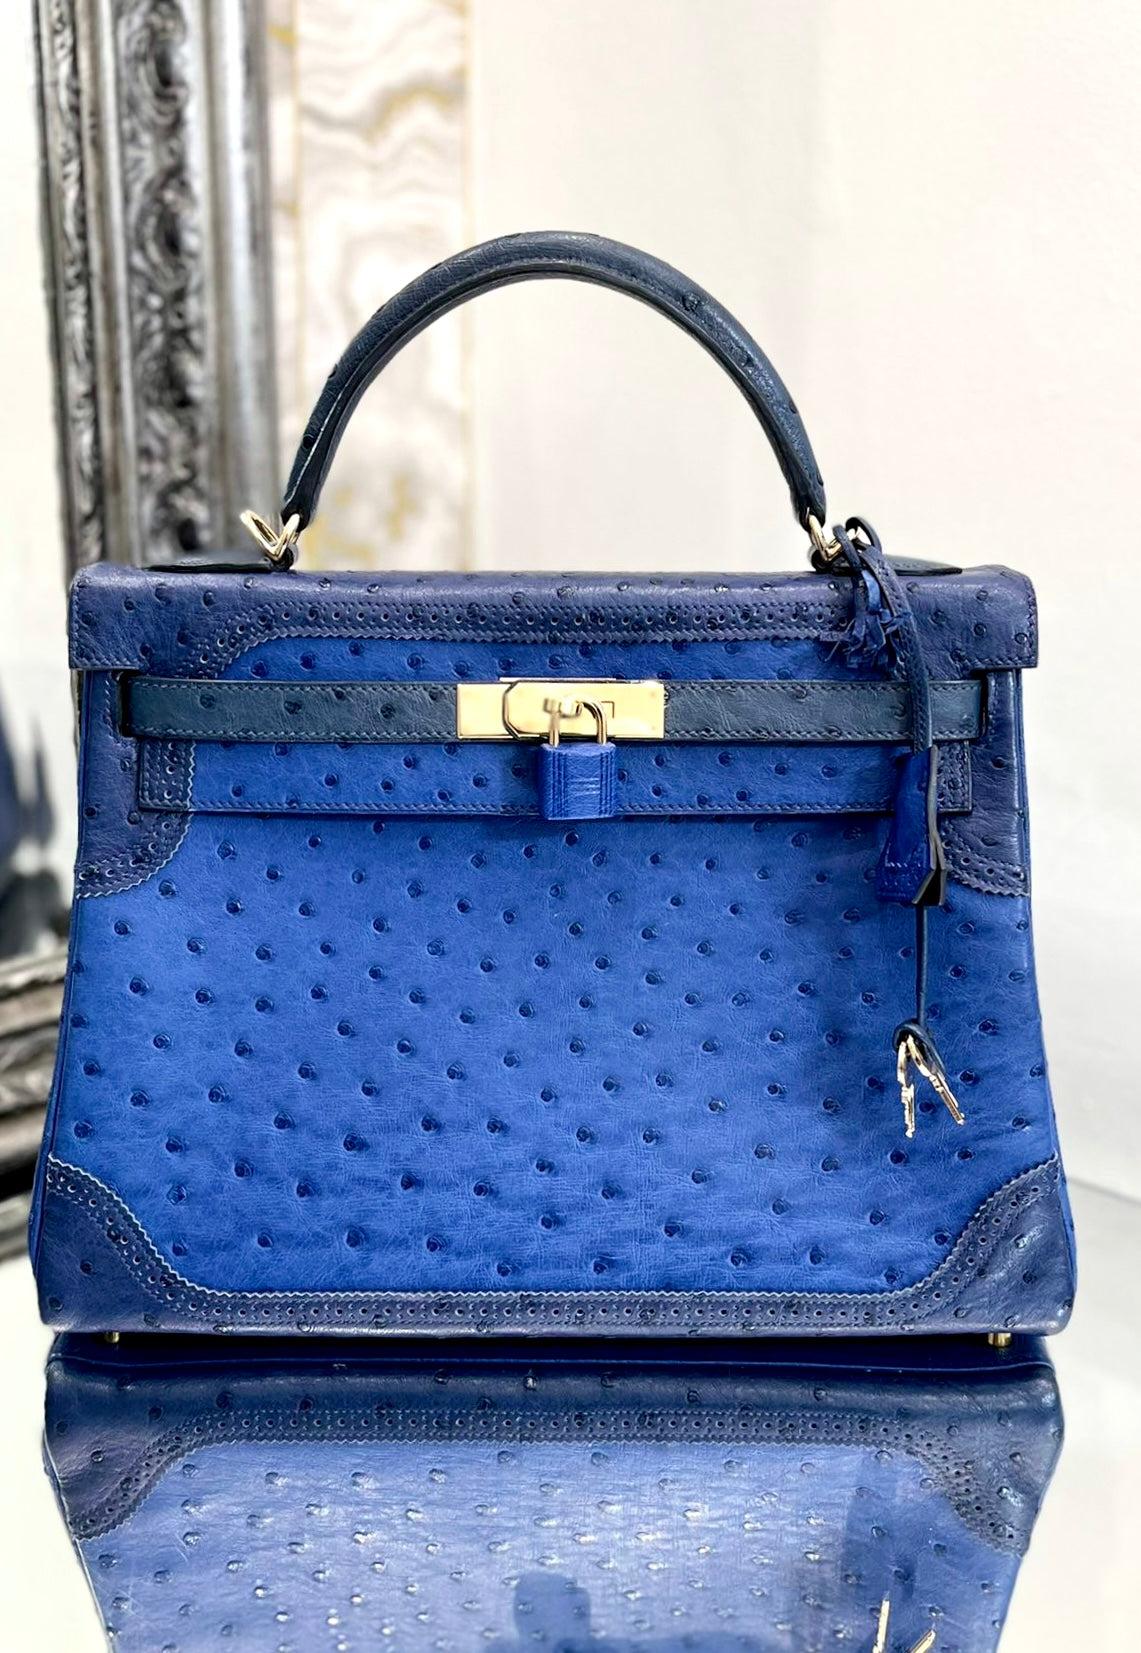 ﻿Hermes Kelly Ltd Edition Ghillies Bag In Ostrich Skin 

Very rare bag, in blue sapphire, blue malte, and blue iris with 

gold hardware. Keys, clochette and removable shoulder strap.

Date stamp 2014.

Some of the protective covers are still on the